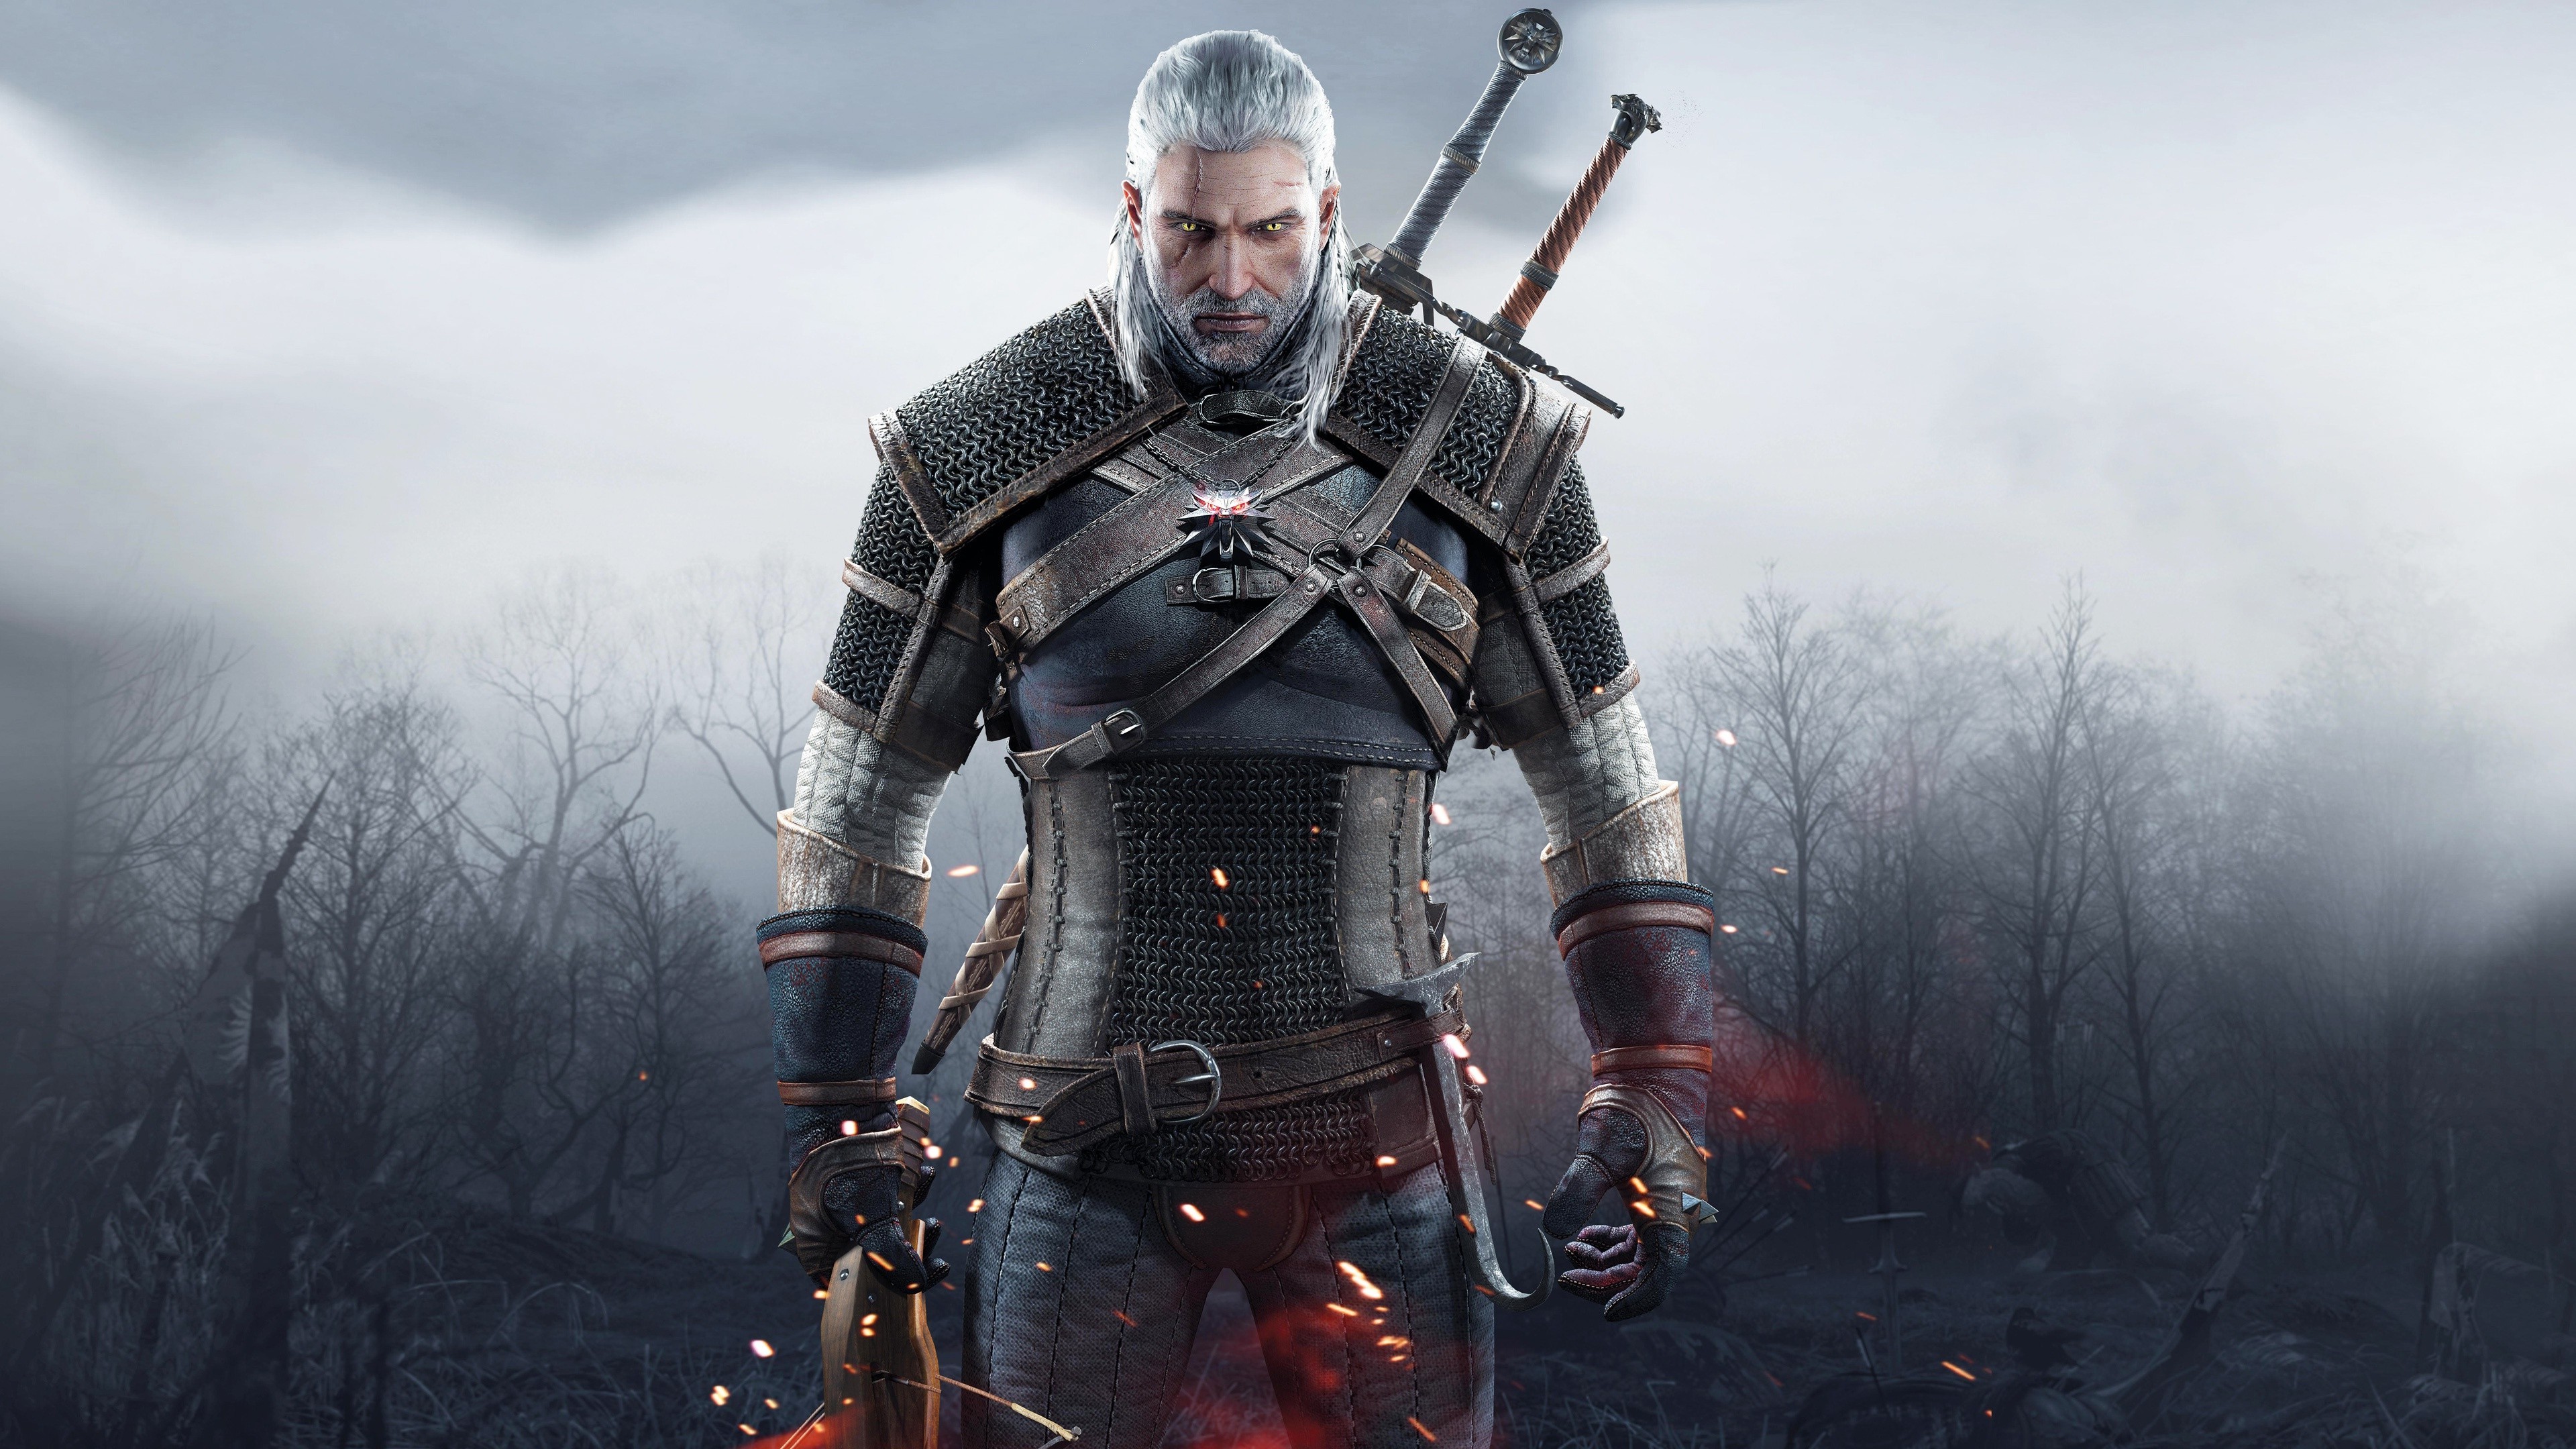 The Witcher 3: Wild Hunt, Geralt Of Rivia, Sword, The Witcher Wallpaper